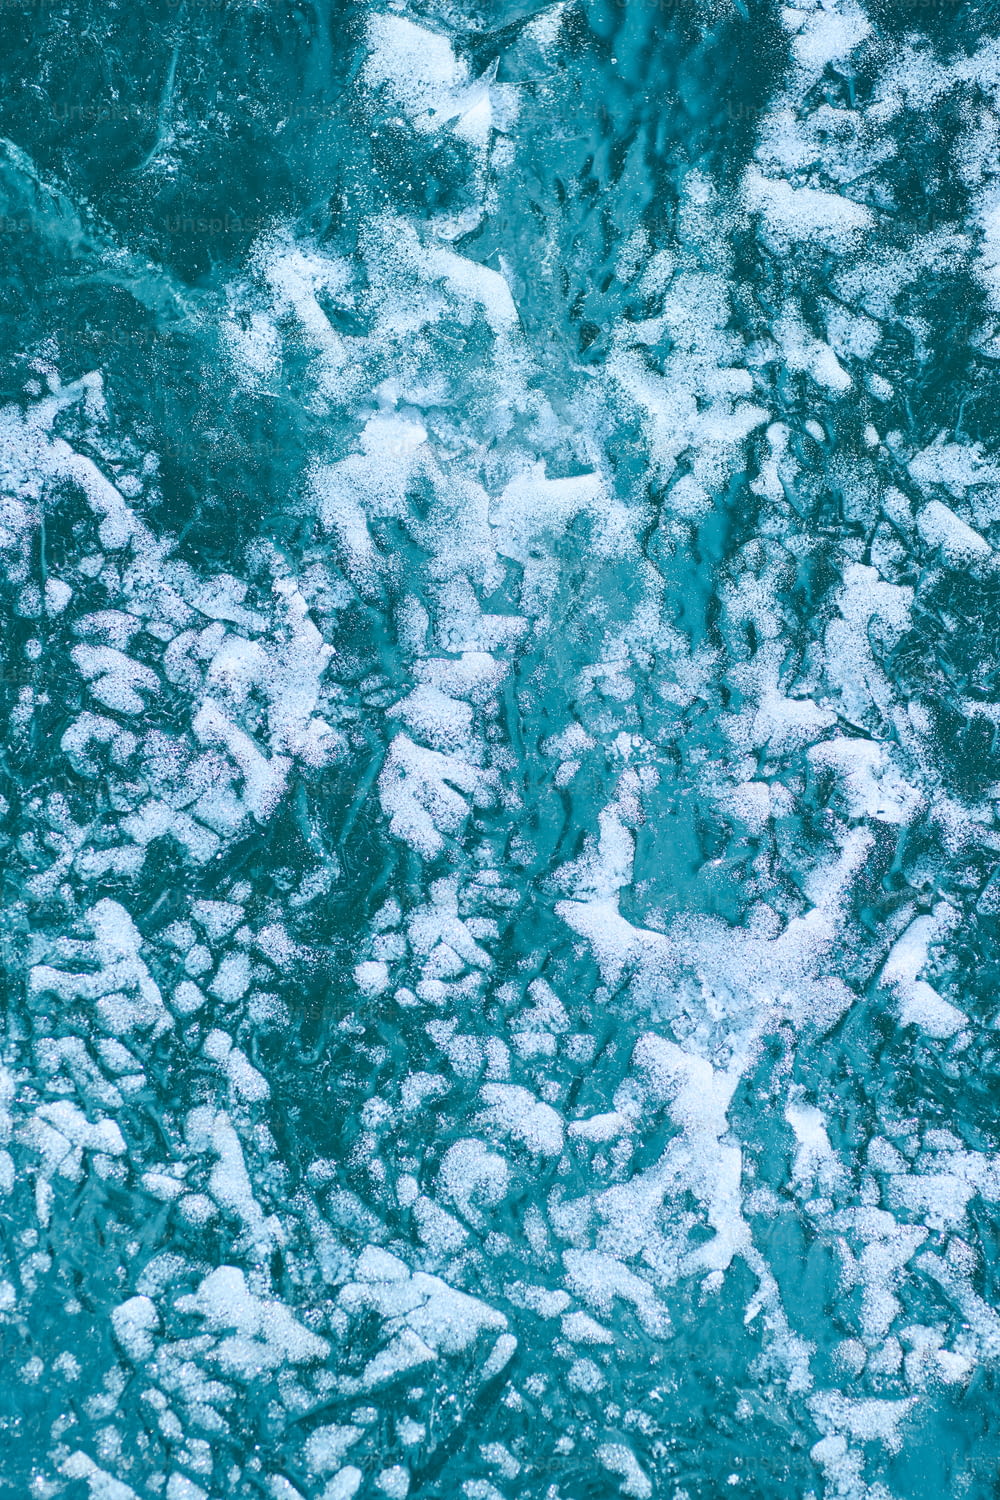 an aerial view of snow on the ground